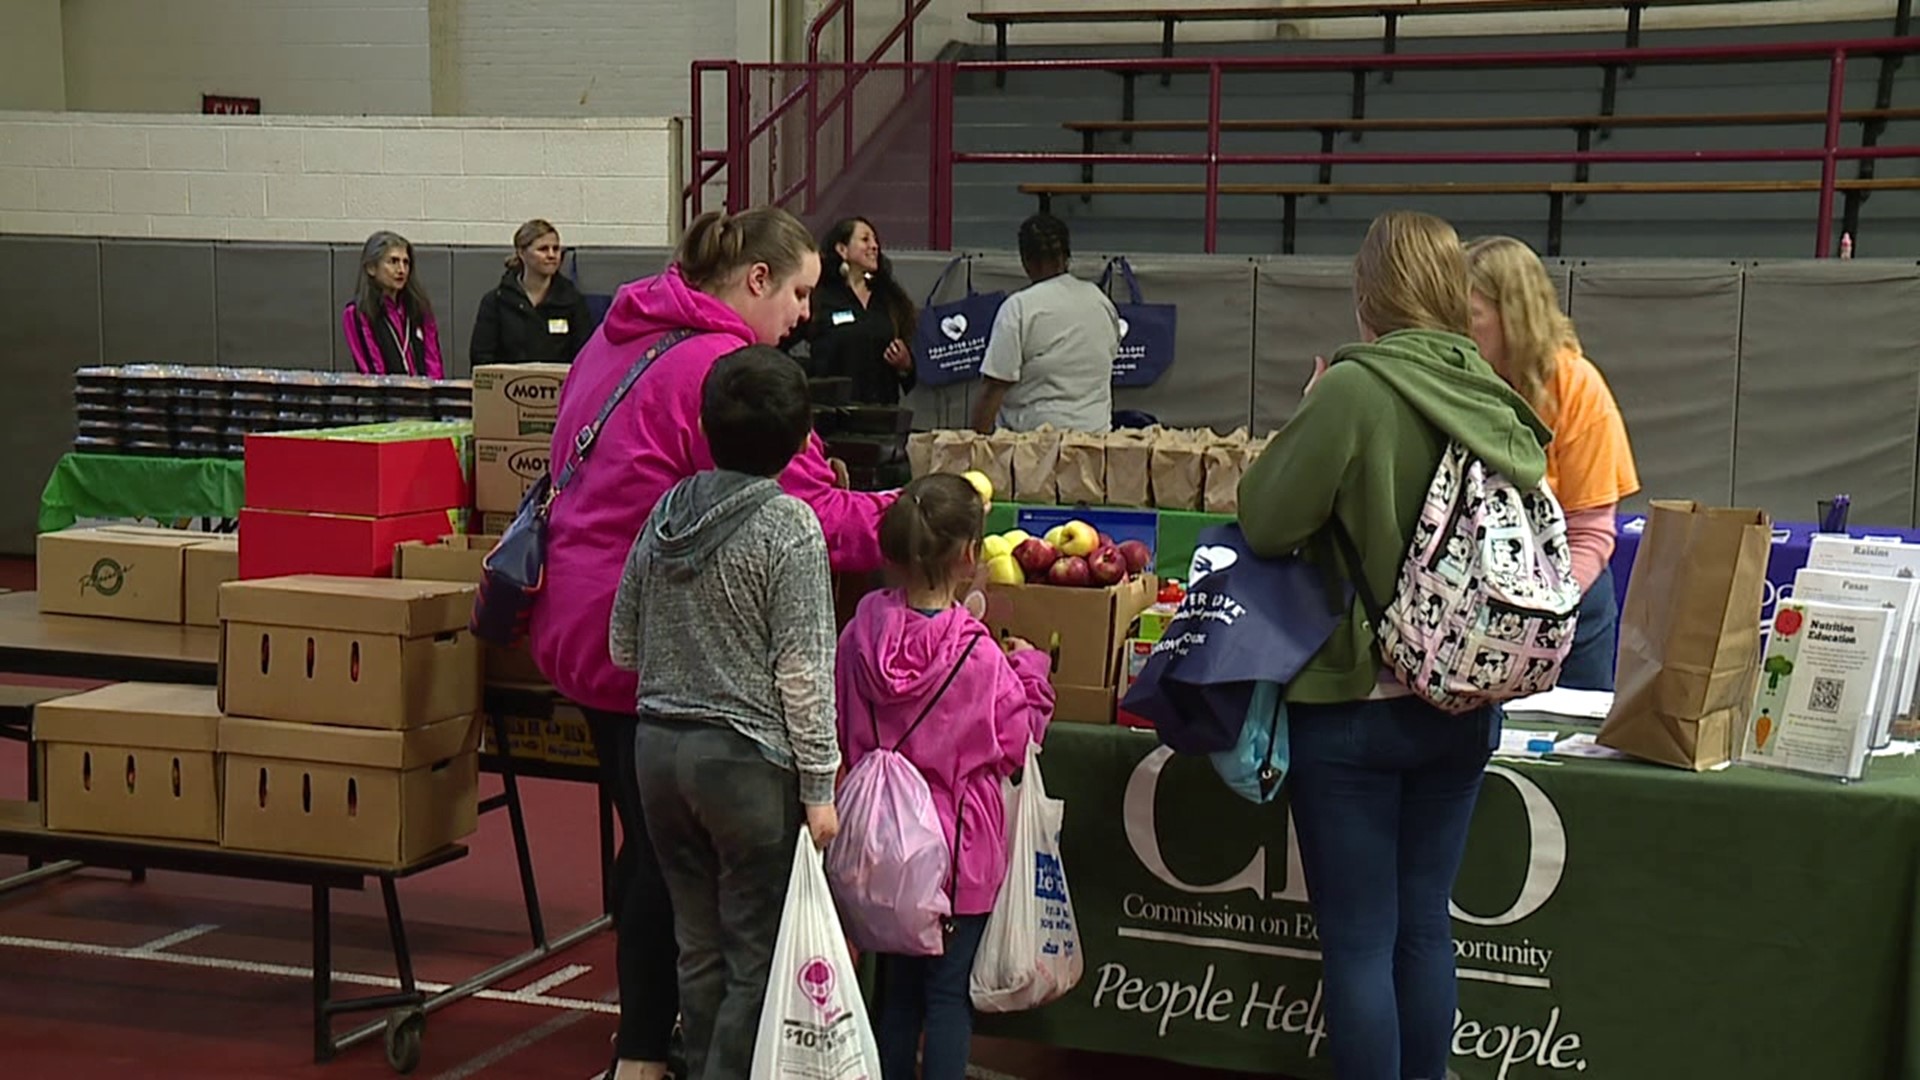 More than 25 nonprofit organizations came to help families during the holiday break.